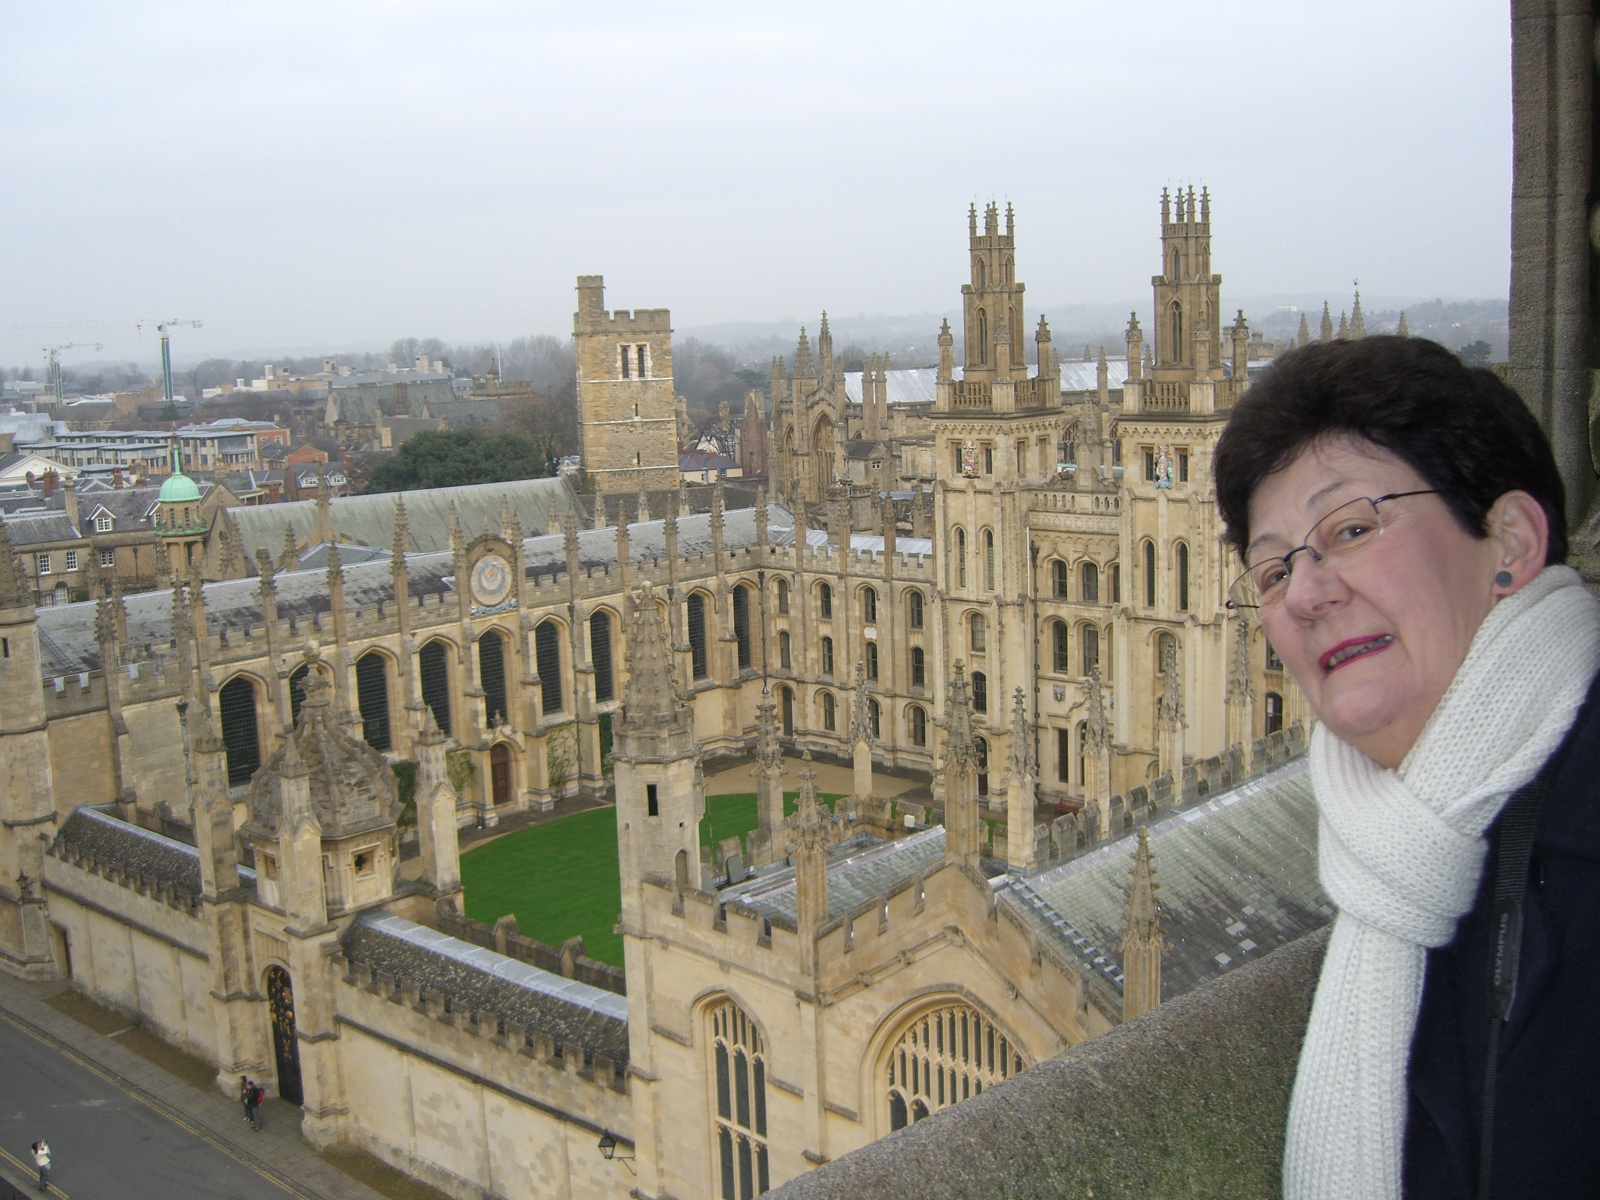 [Mary+over+All+Souls+College+Oxford+Dec06.JPG]